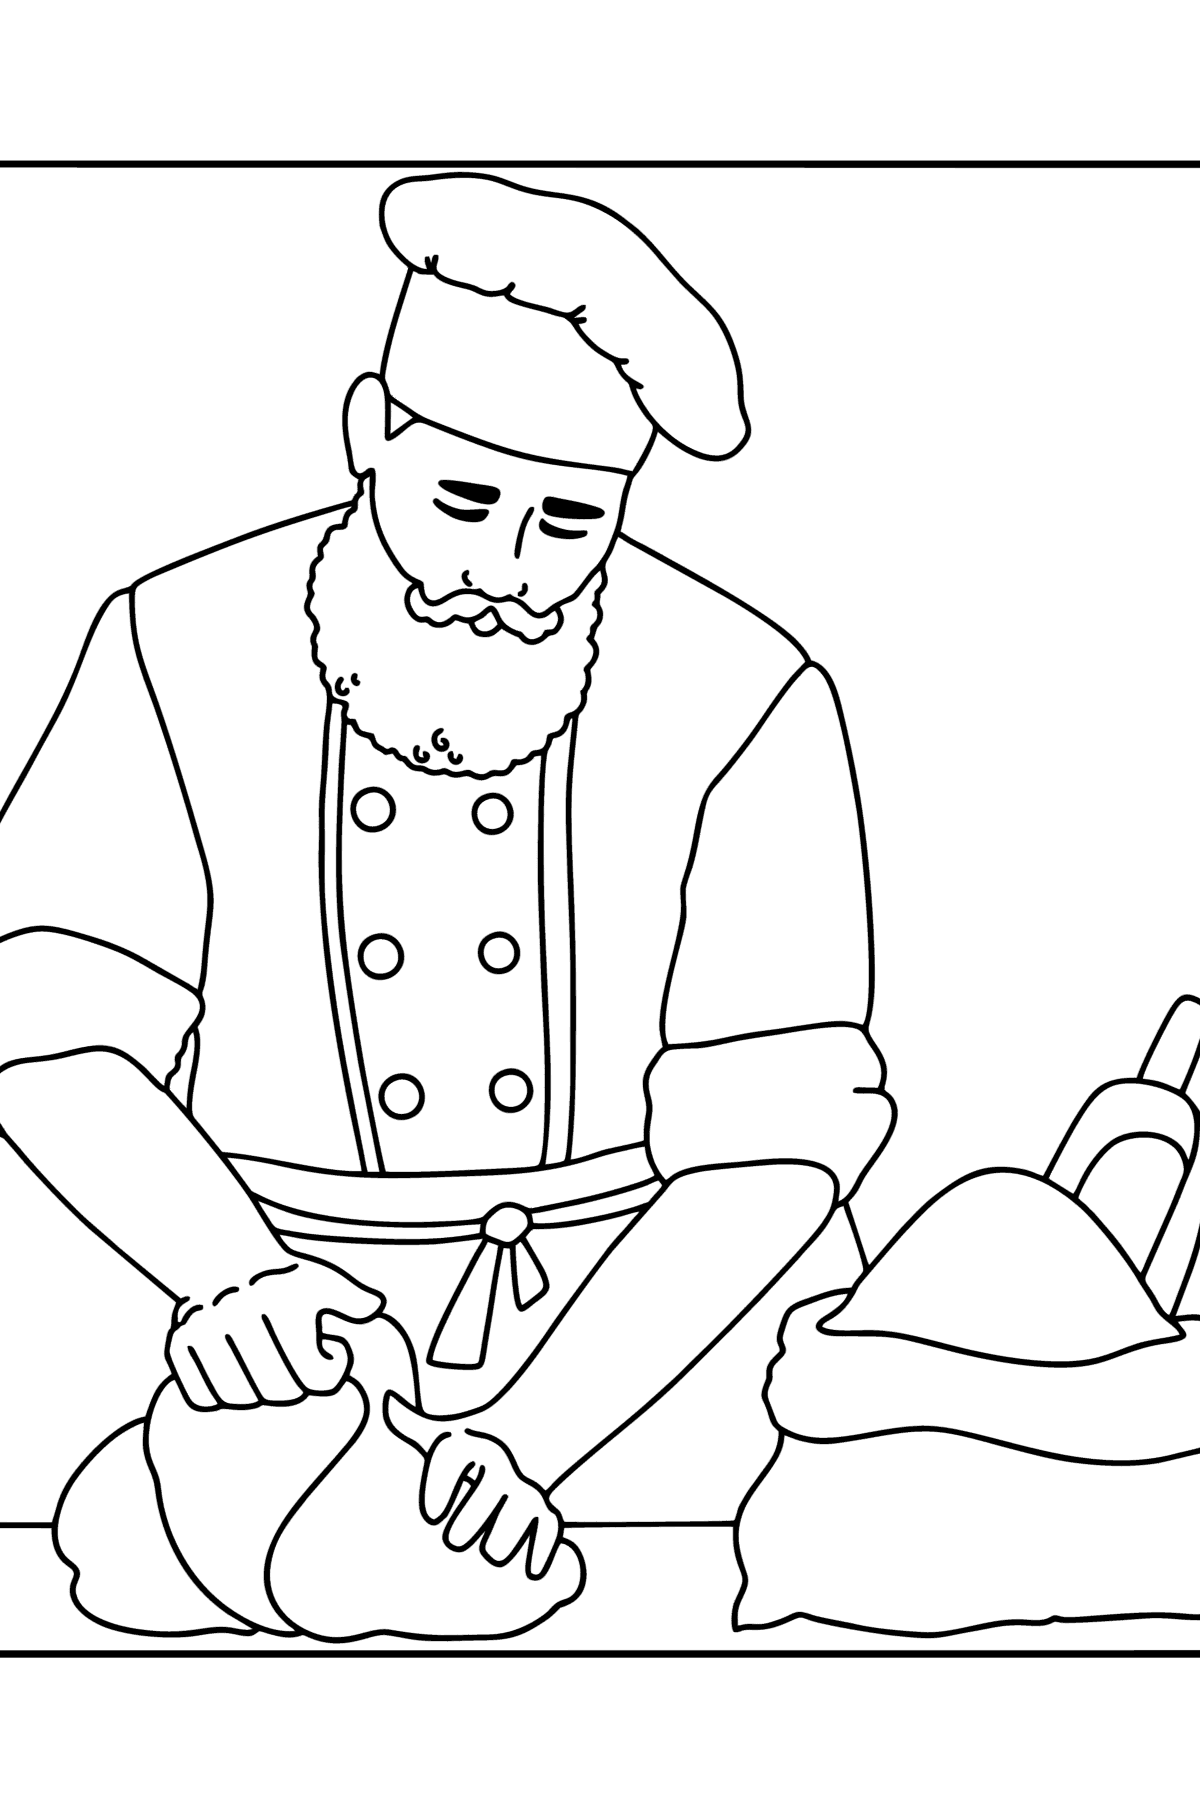 Baker сoloring page - Coloring Pages for Kids